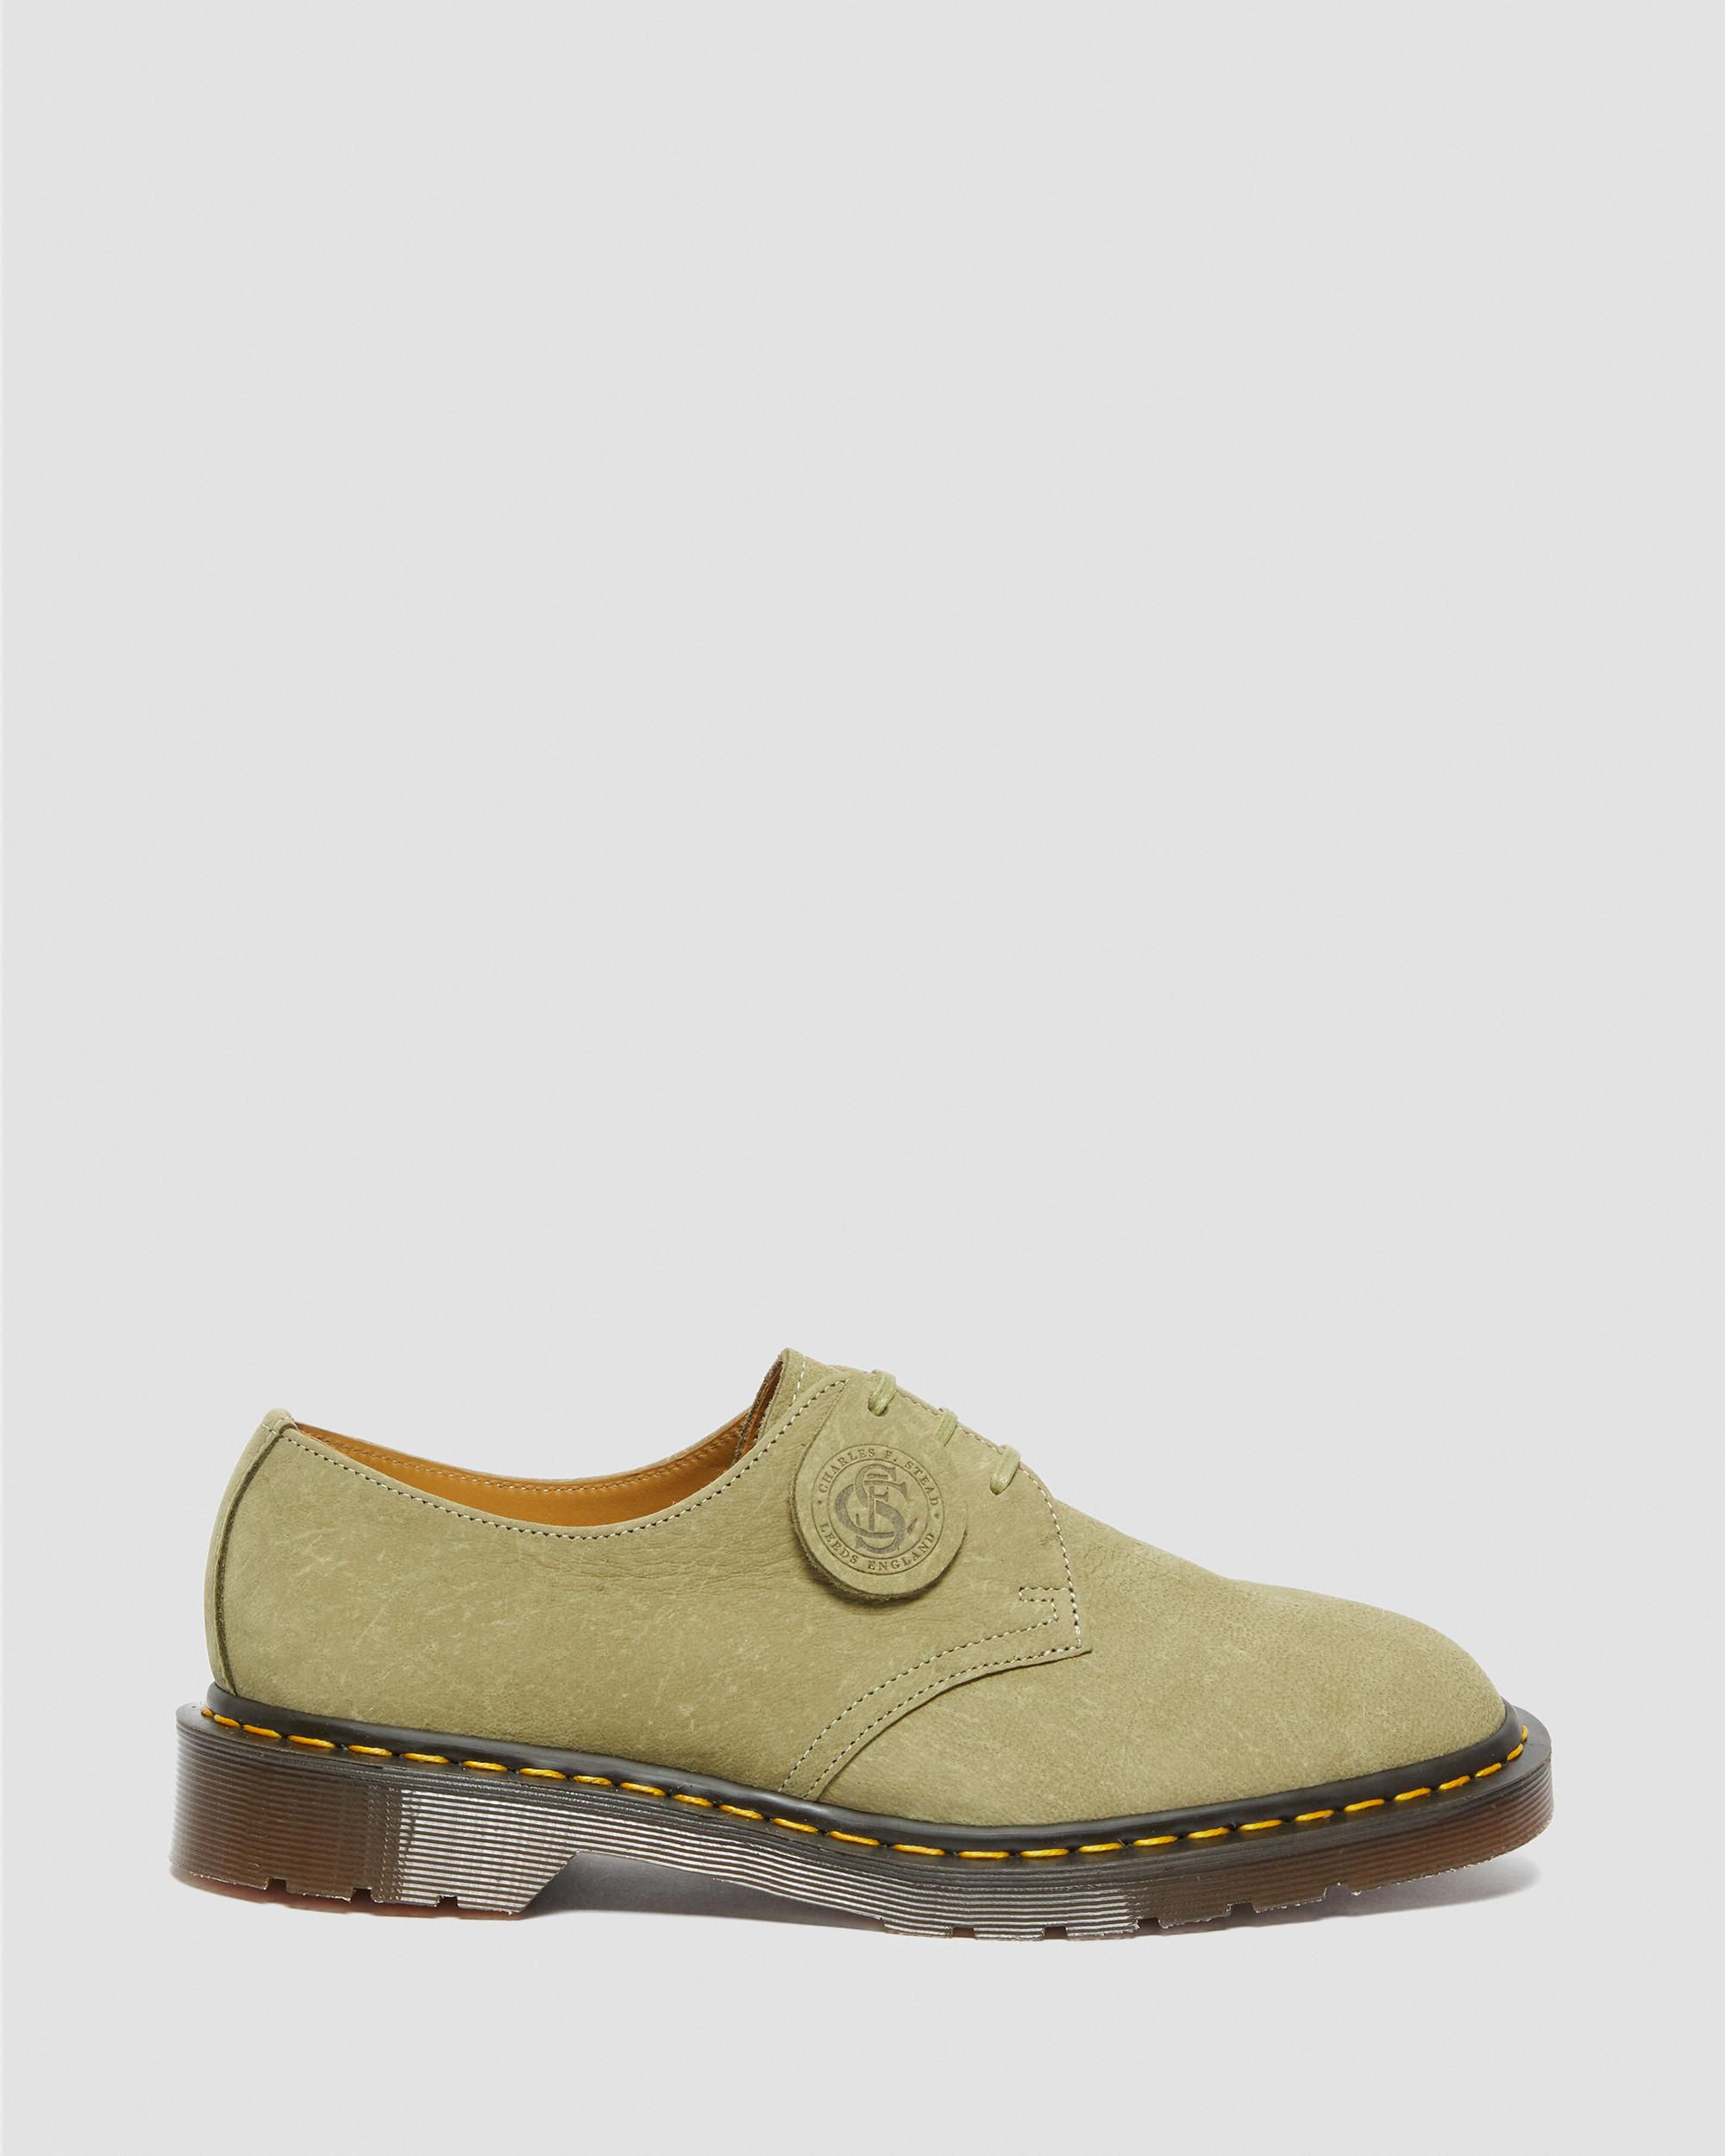 1461 Made in England Nubuck Leather Oxford Shoes | Dr. Martens